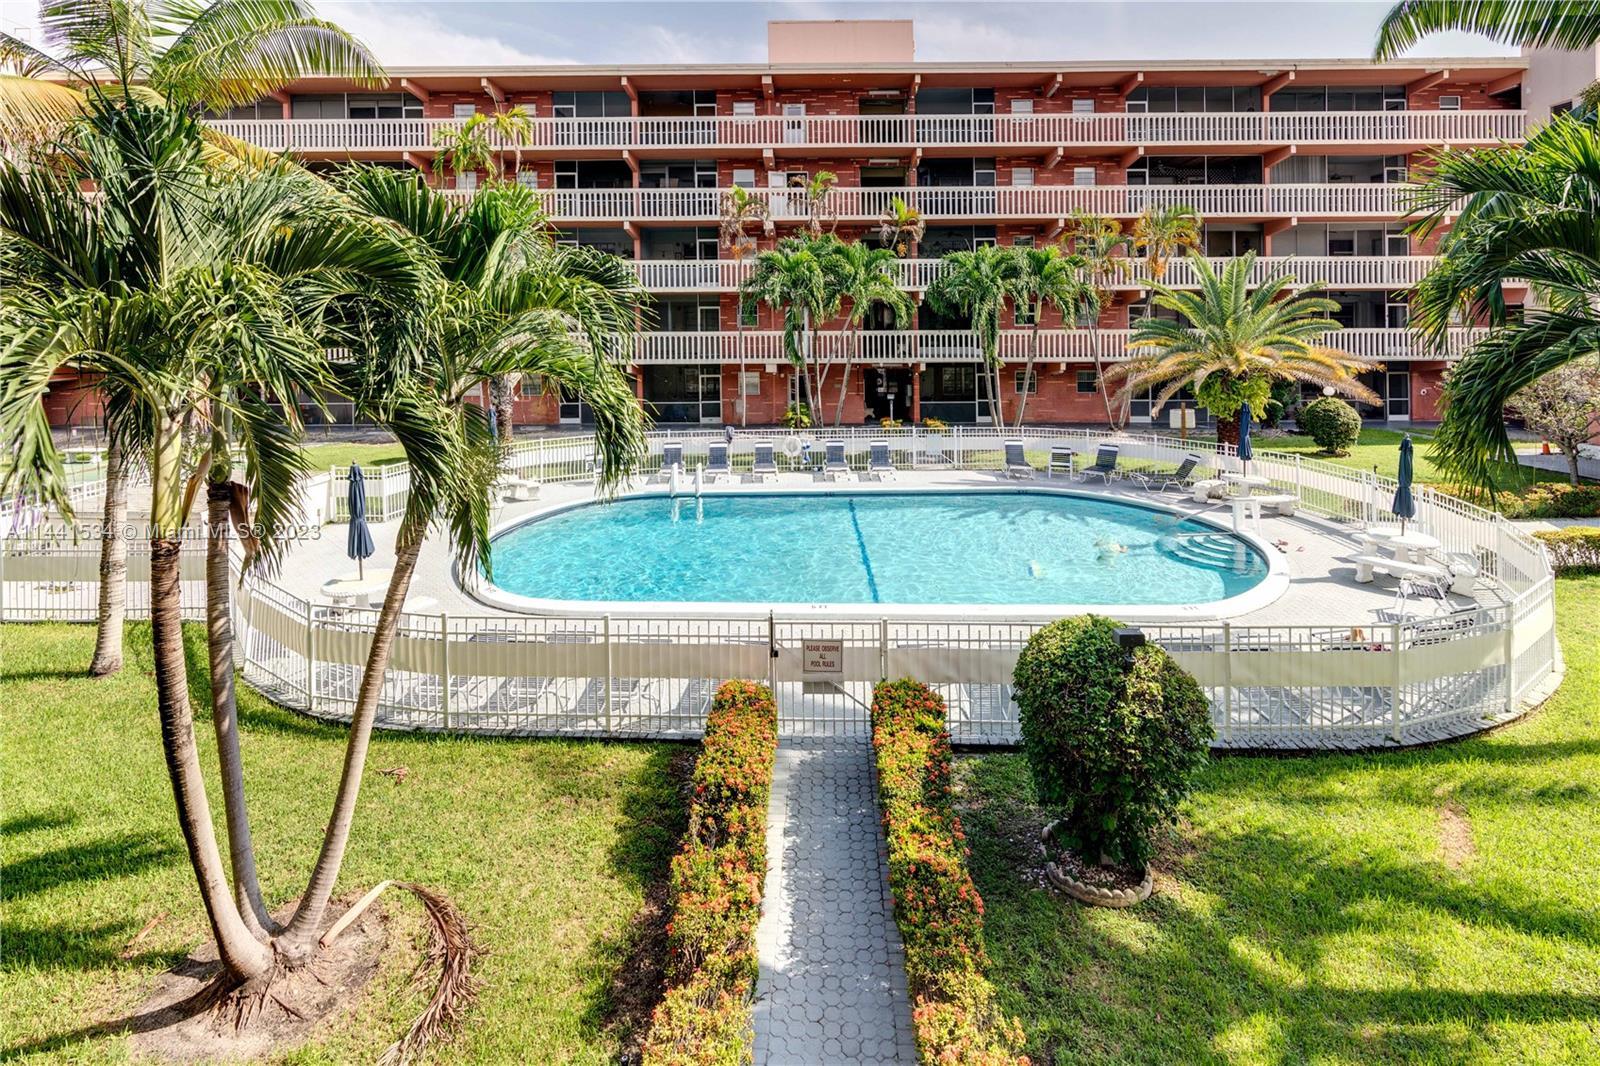 Beautifully remodeled 2 bed/2 bath condo in Hallandale Beach. Enjoy a fully renovated kitchen with q